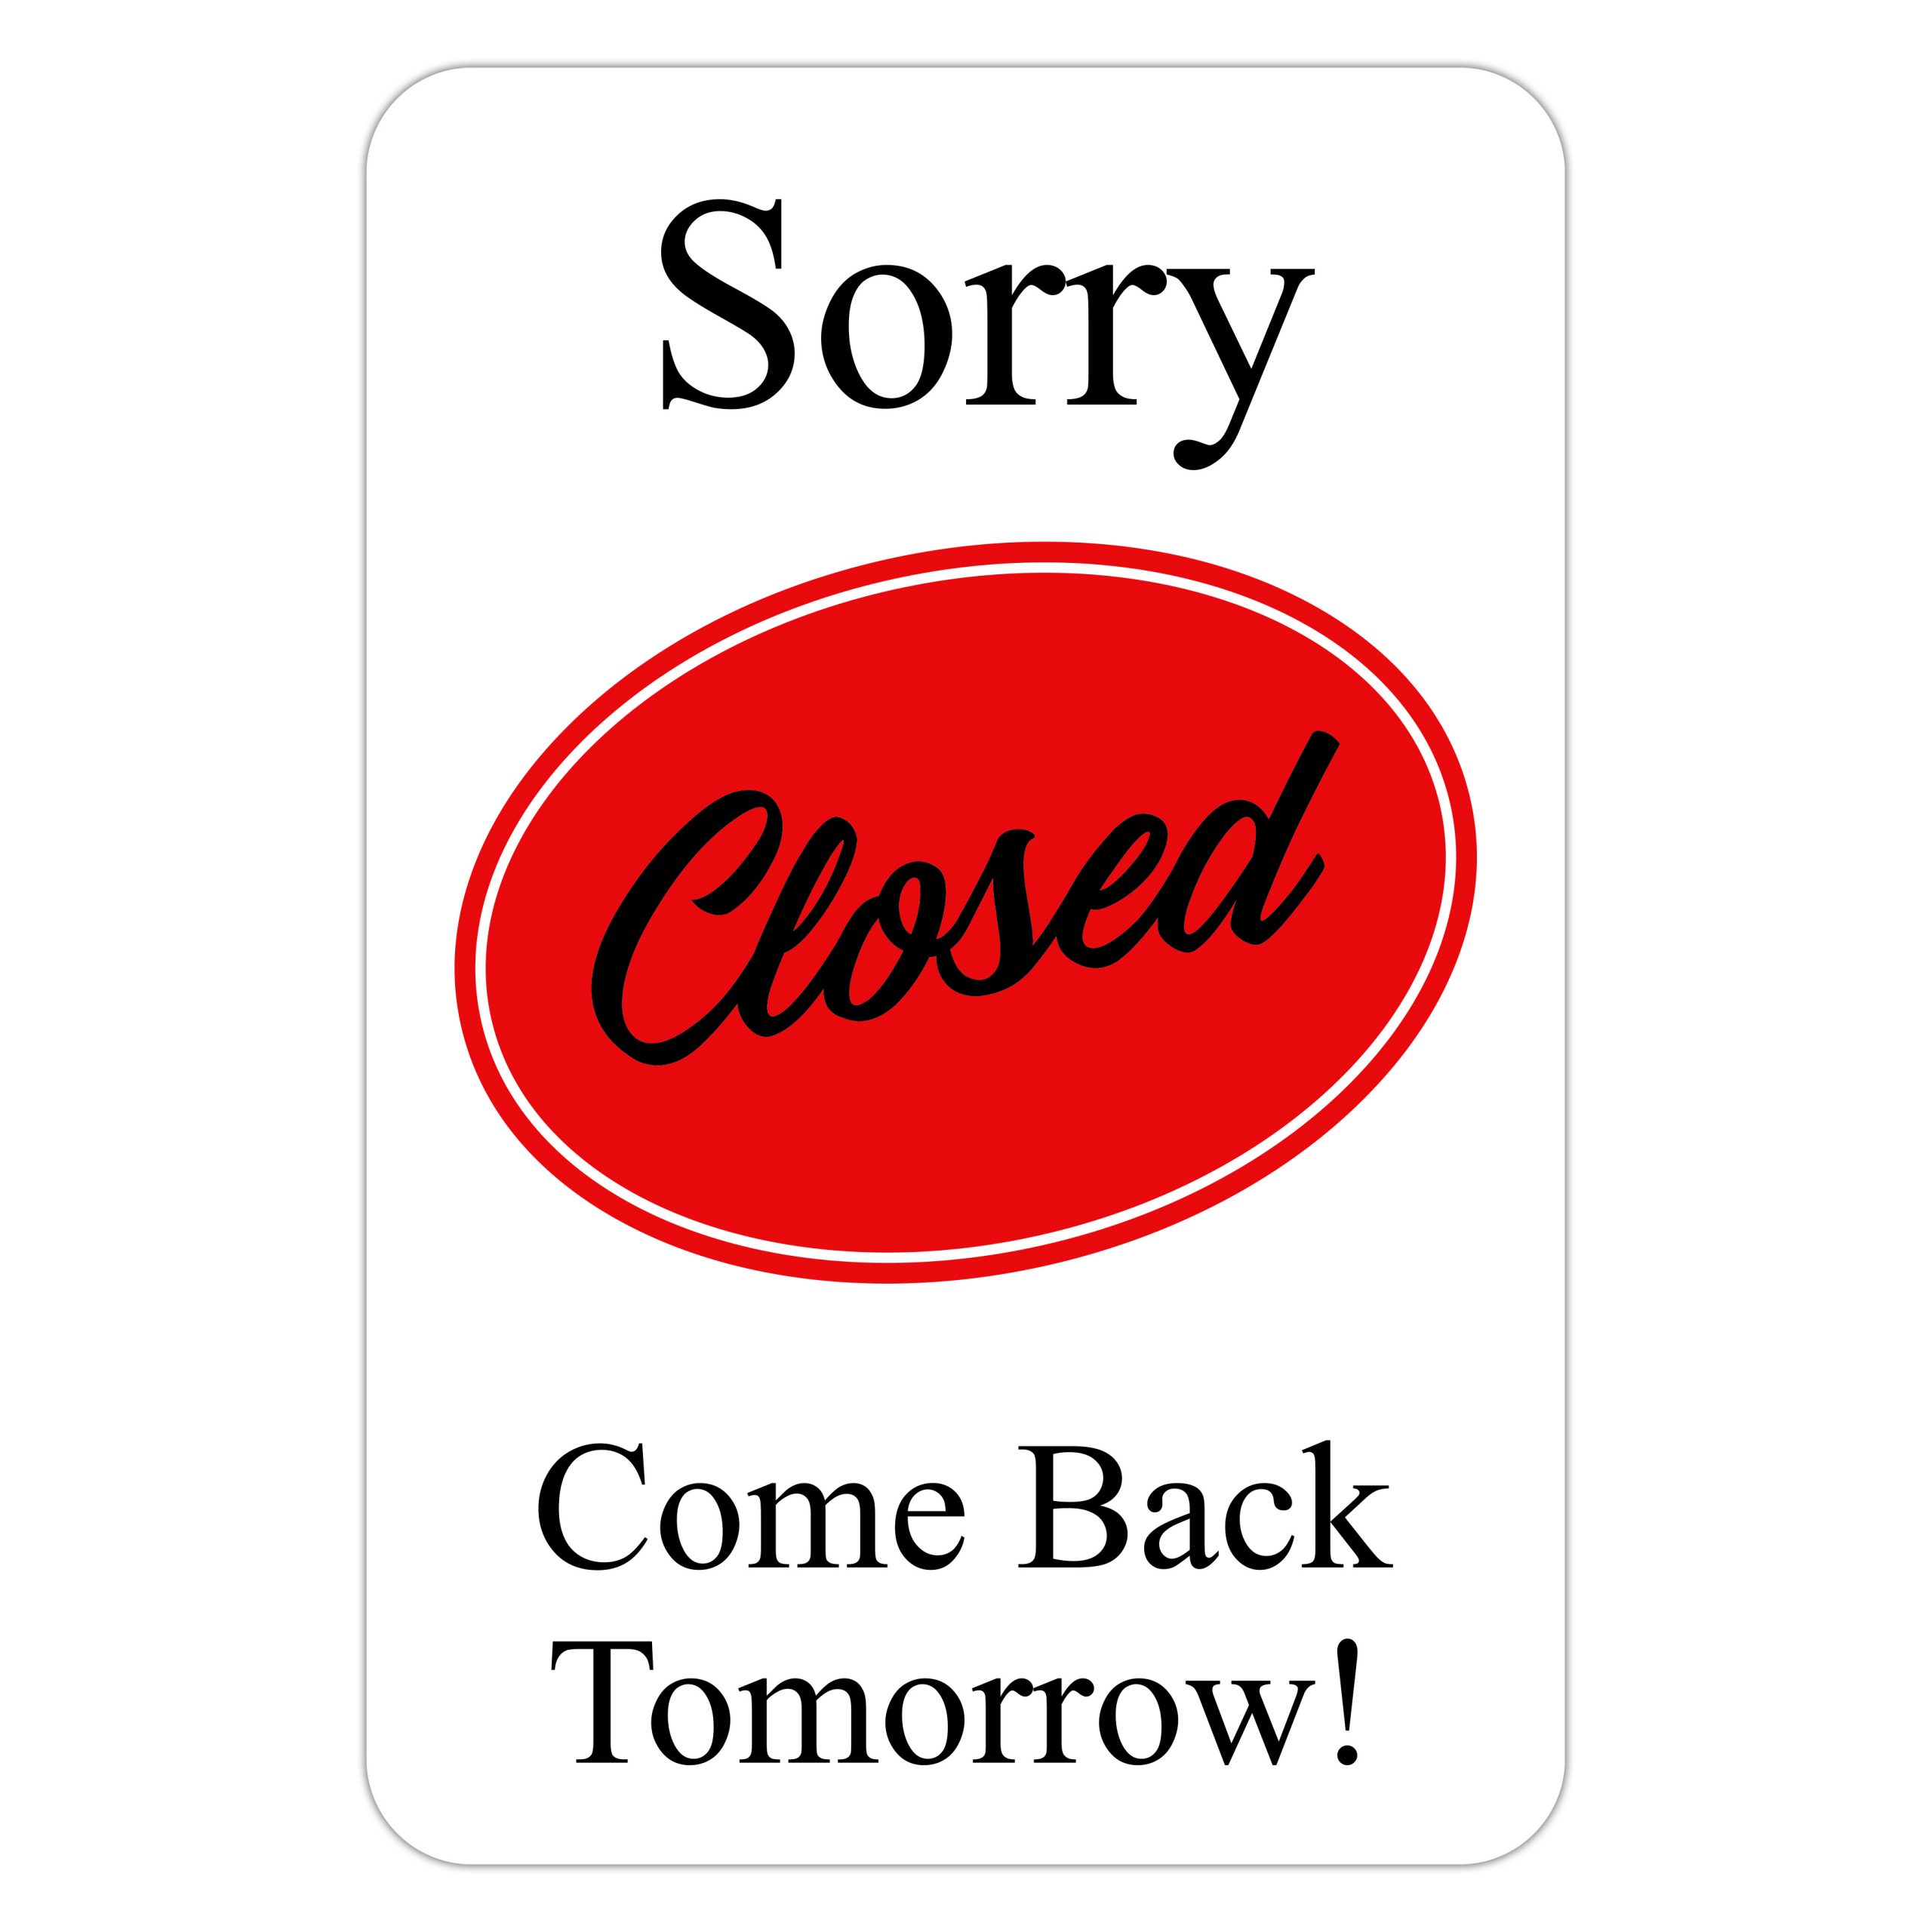 SORRY CLOSED COME BACK TOMORROW American Sign Company